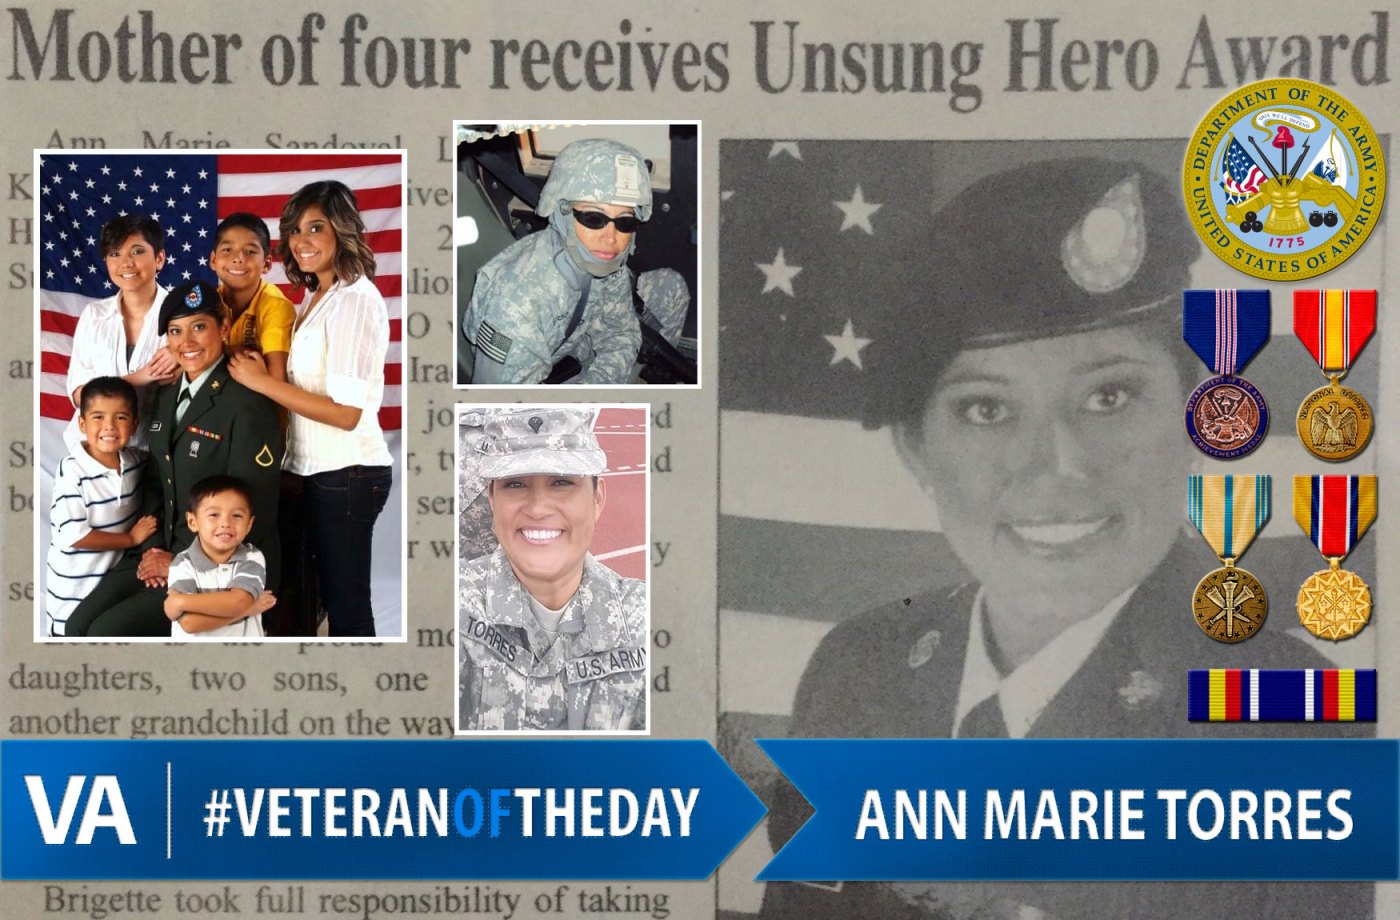 Veteran of the day Anna Marie Torres